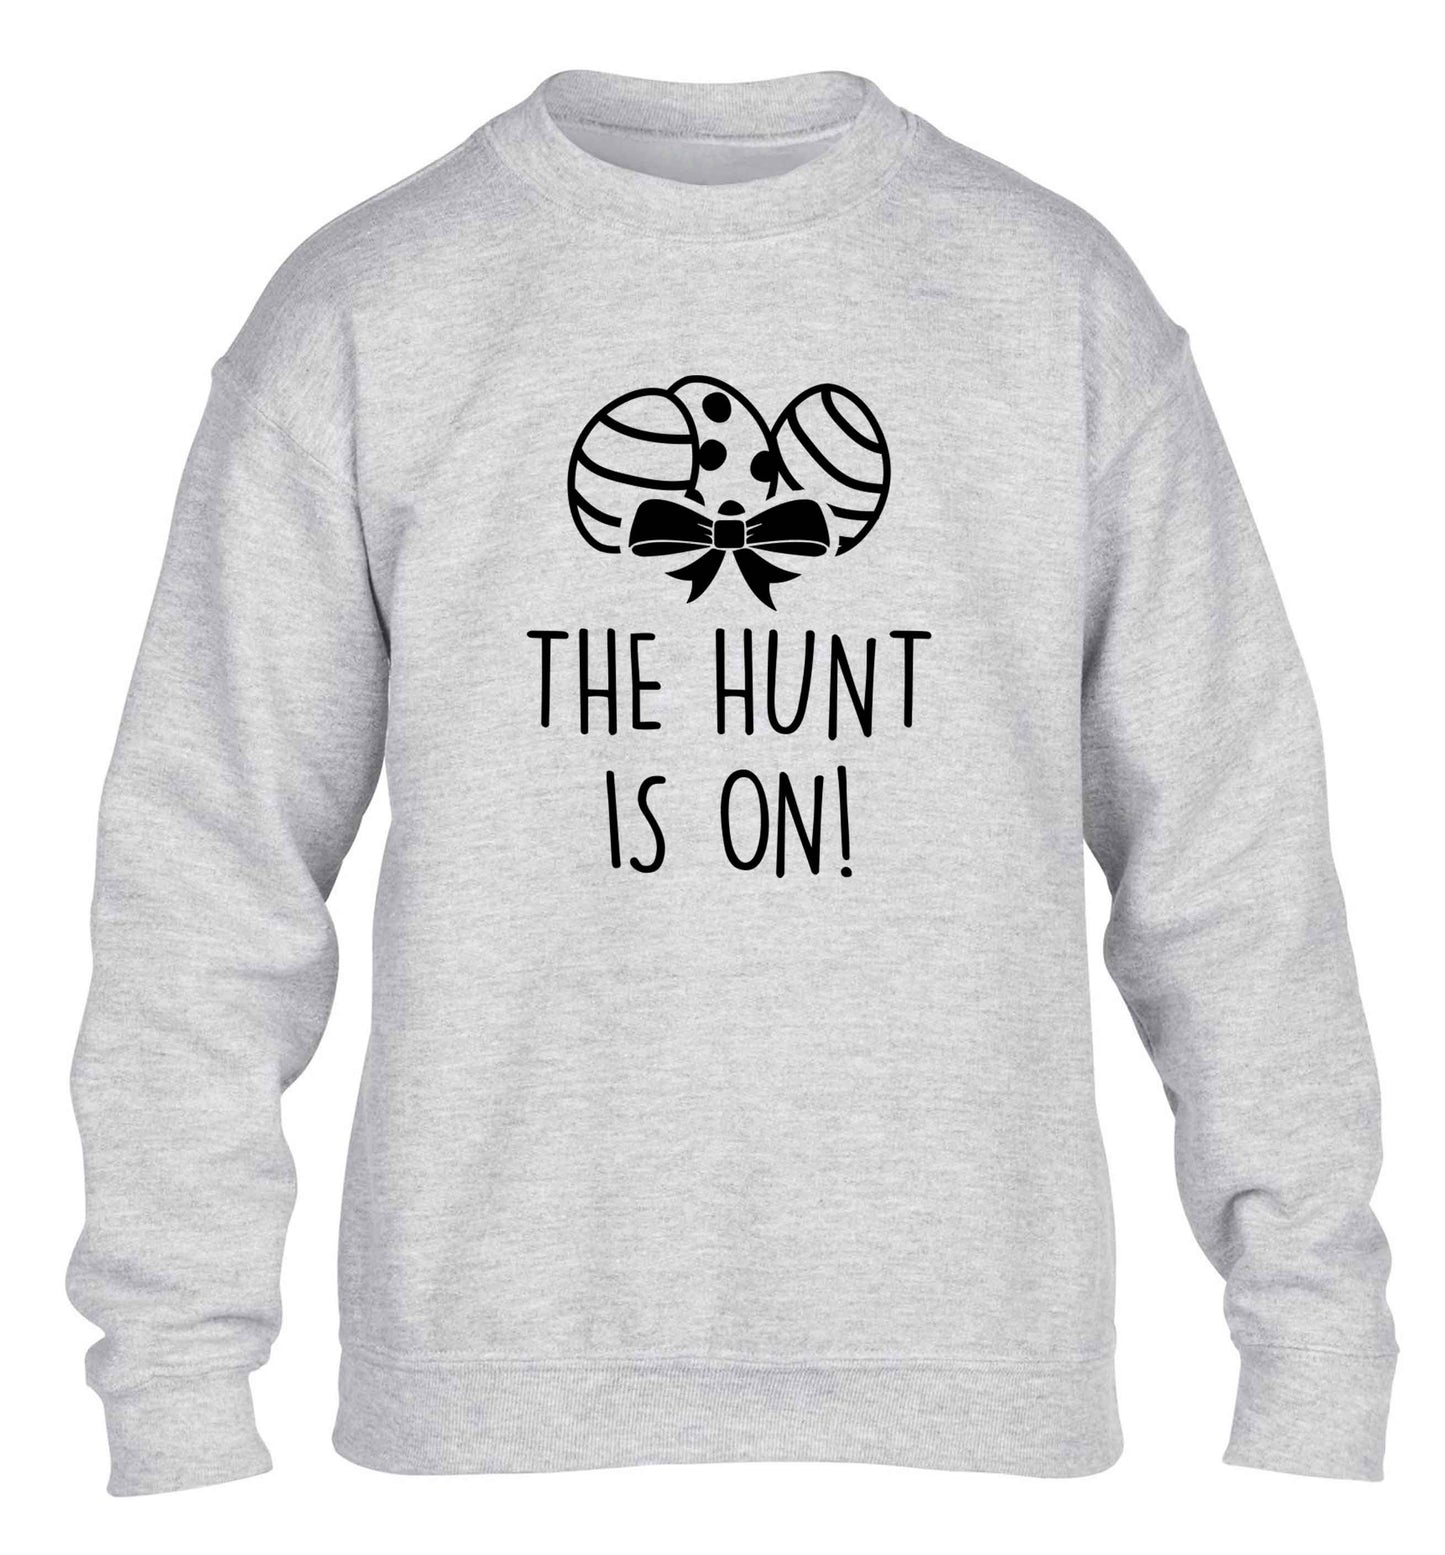 The hunt is on children's grey sweater 12-13 Years